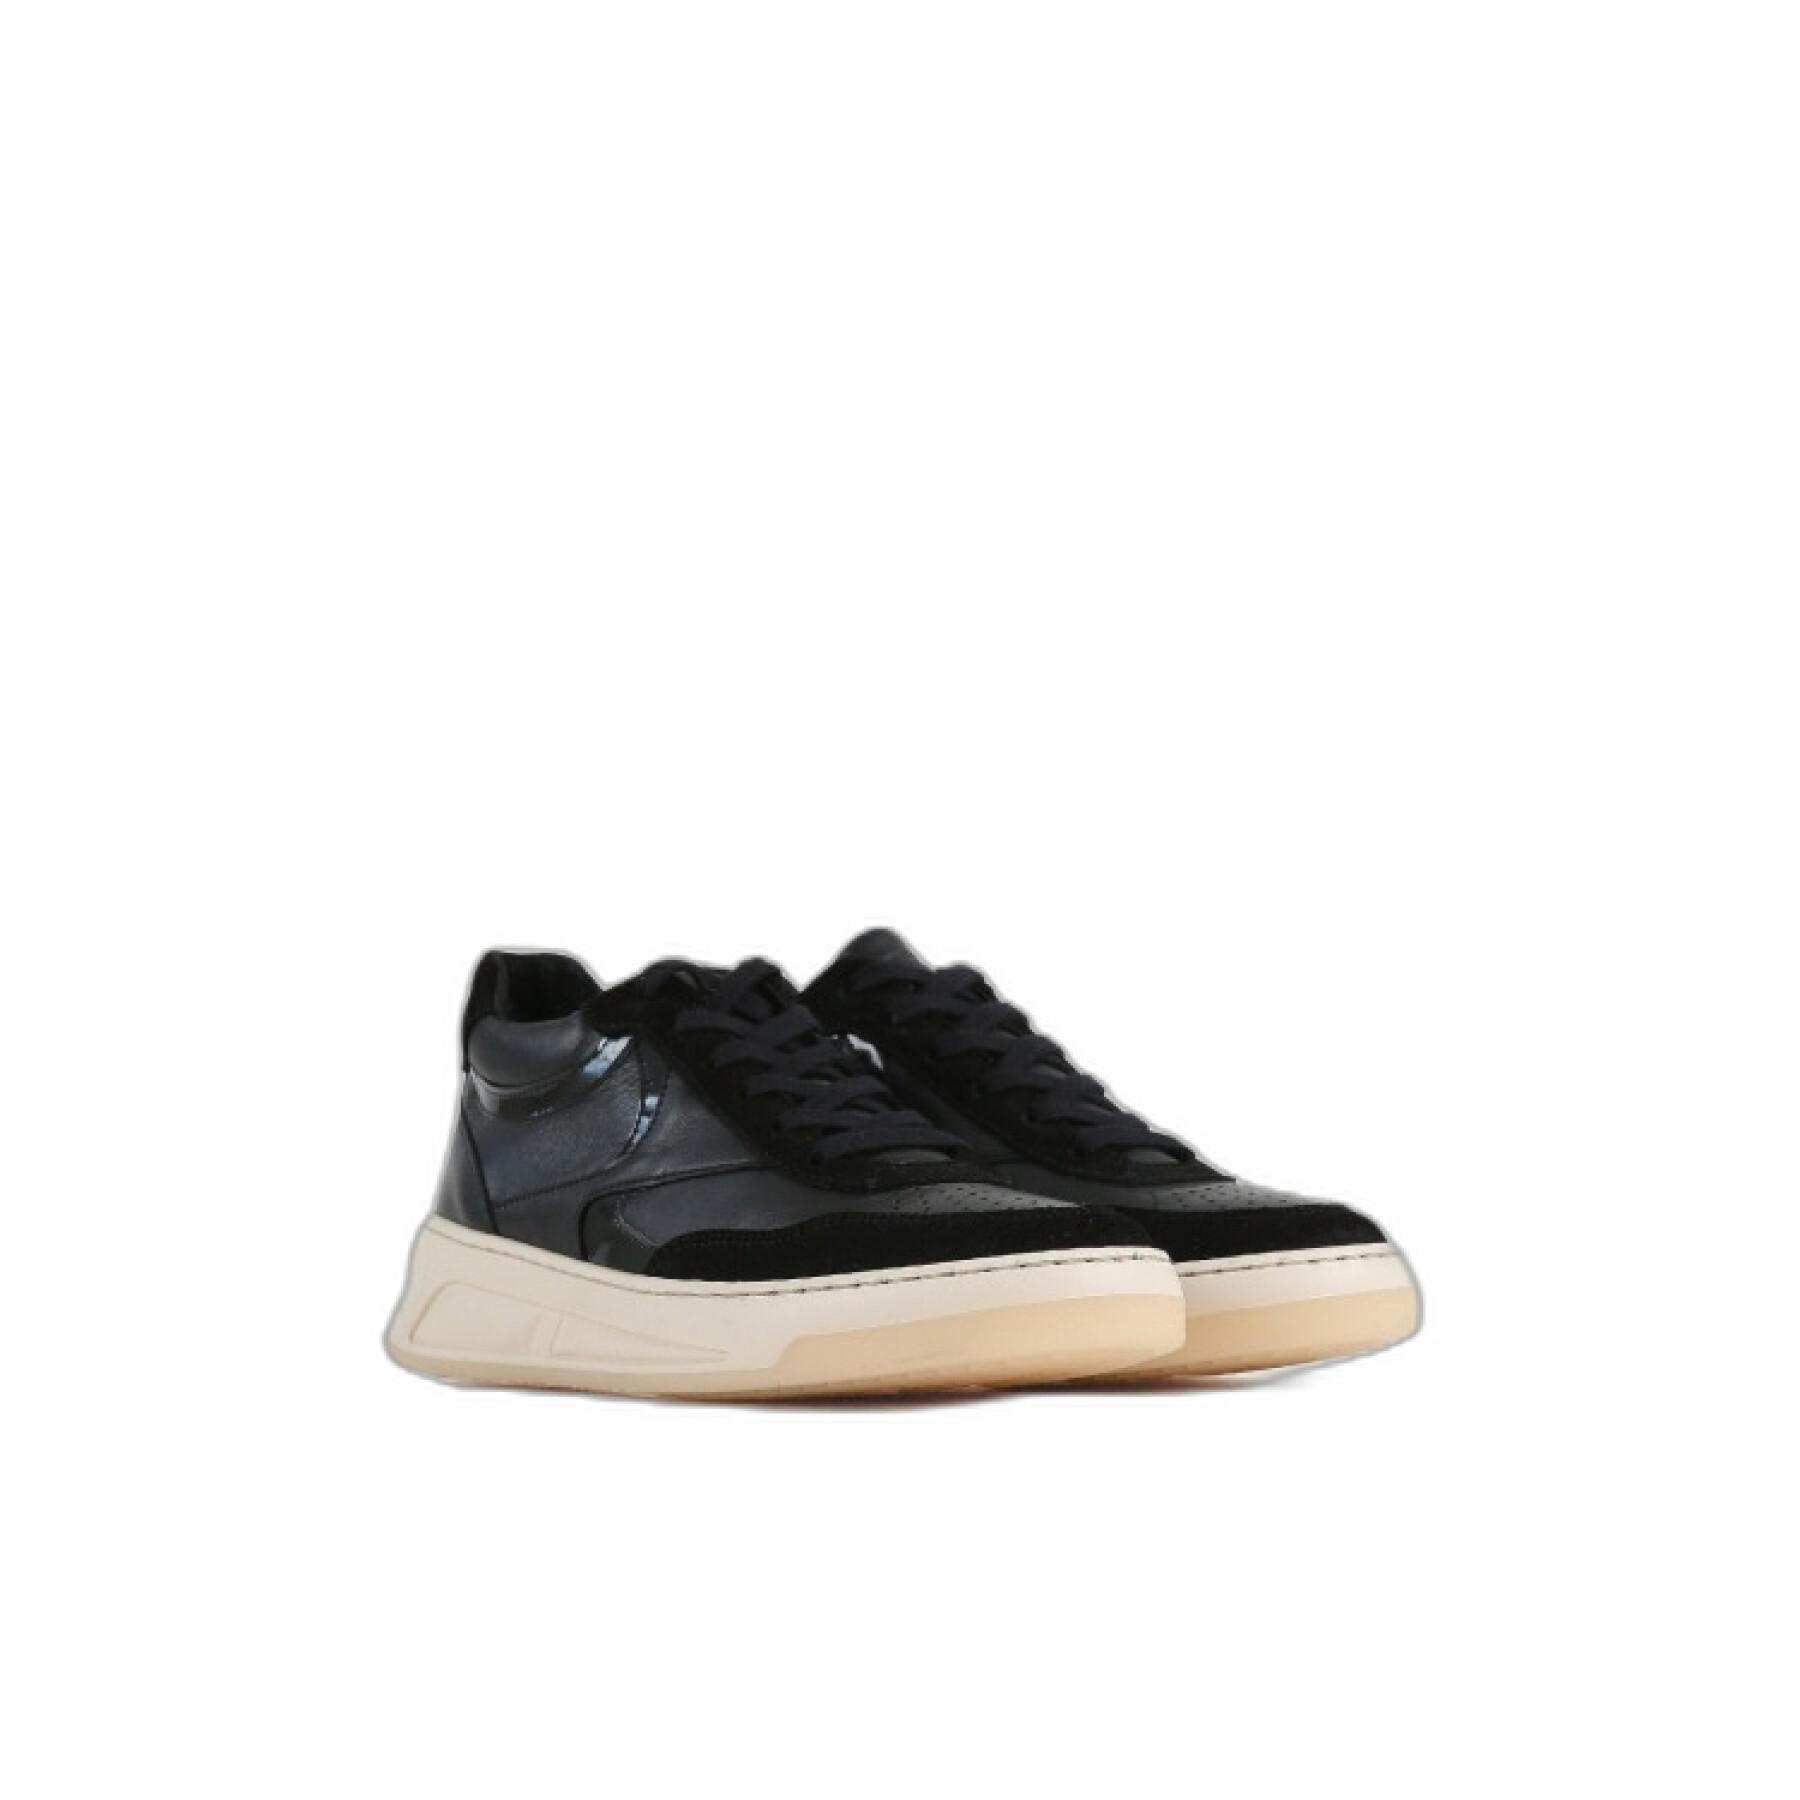 Women's sneakers Bronx Old-Cosmo